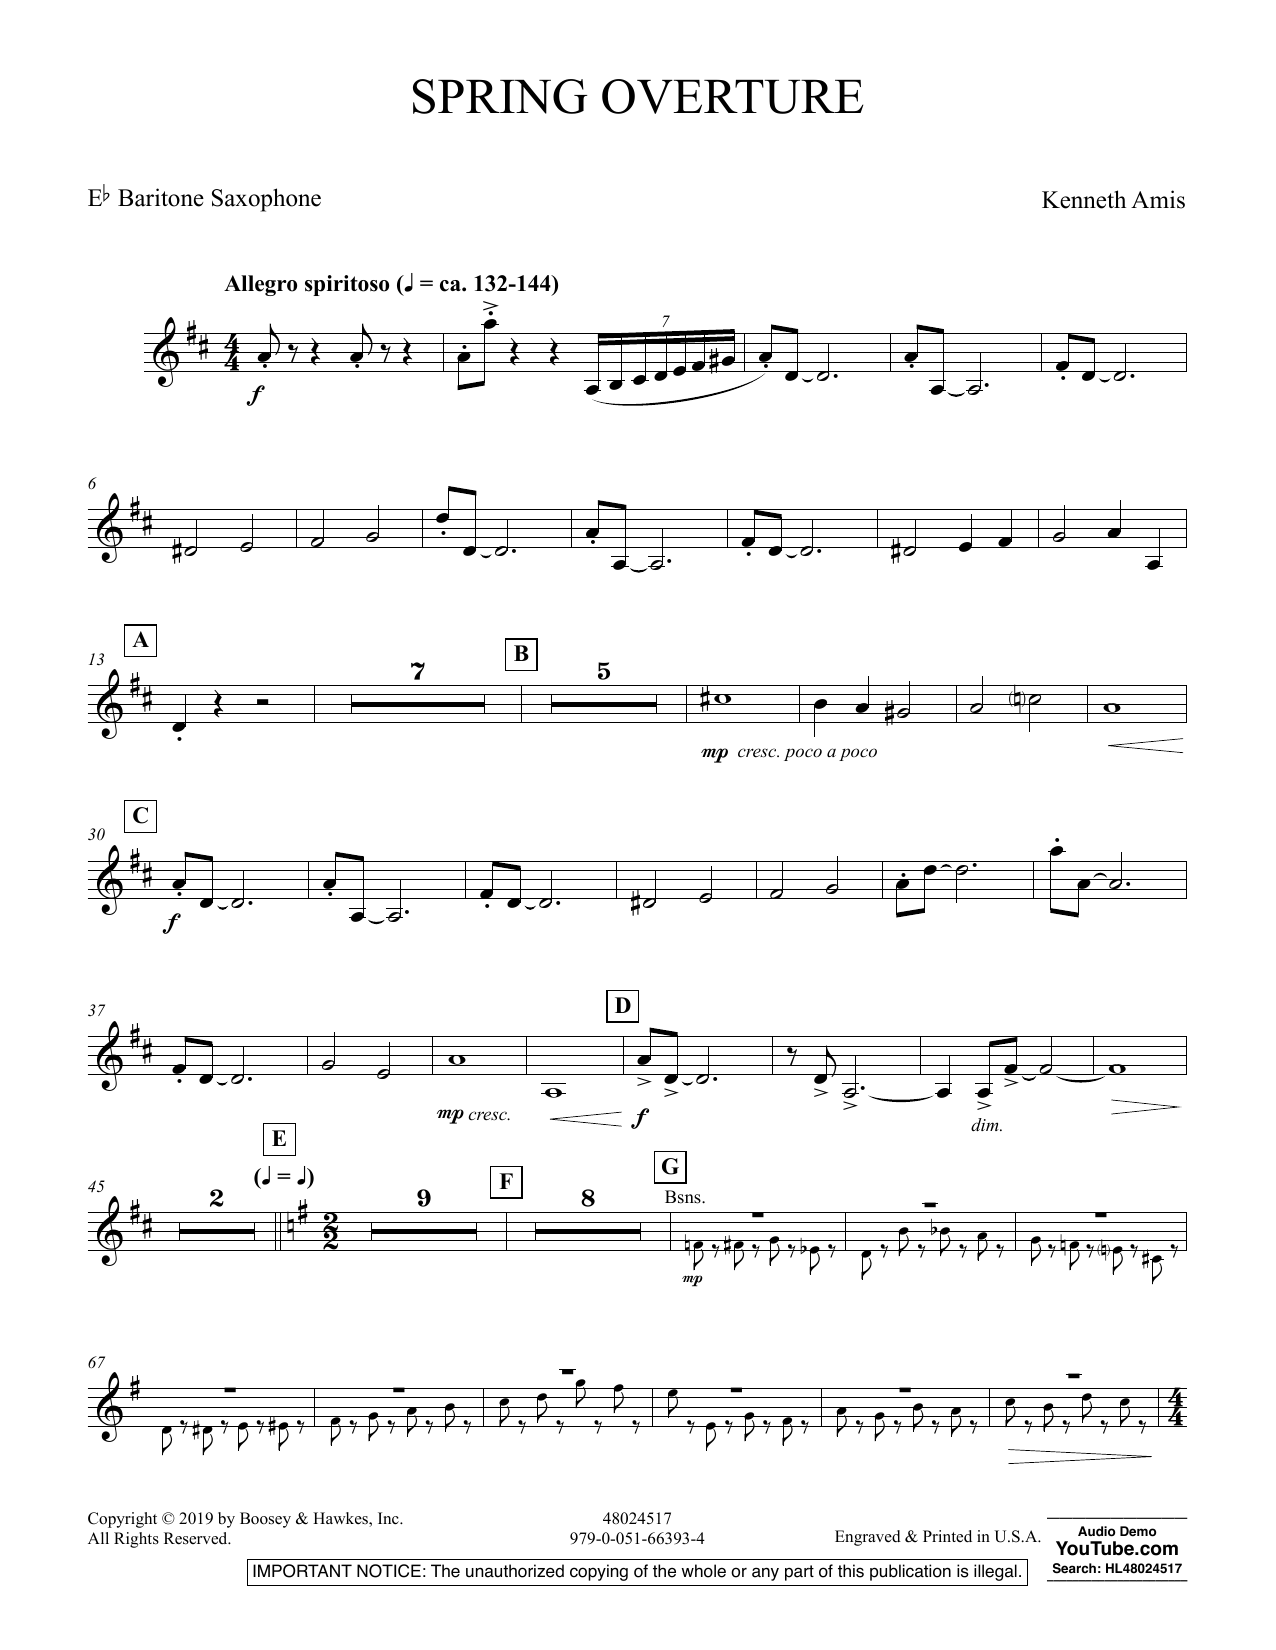 Kenneth Amis Spring Overture - Eb Baritone Saxophone sheet music preview music notes and score for Concert Band including 3 page(s)